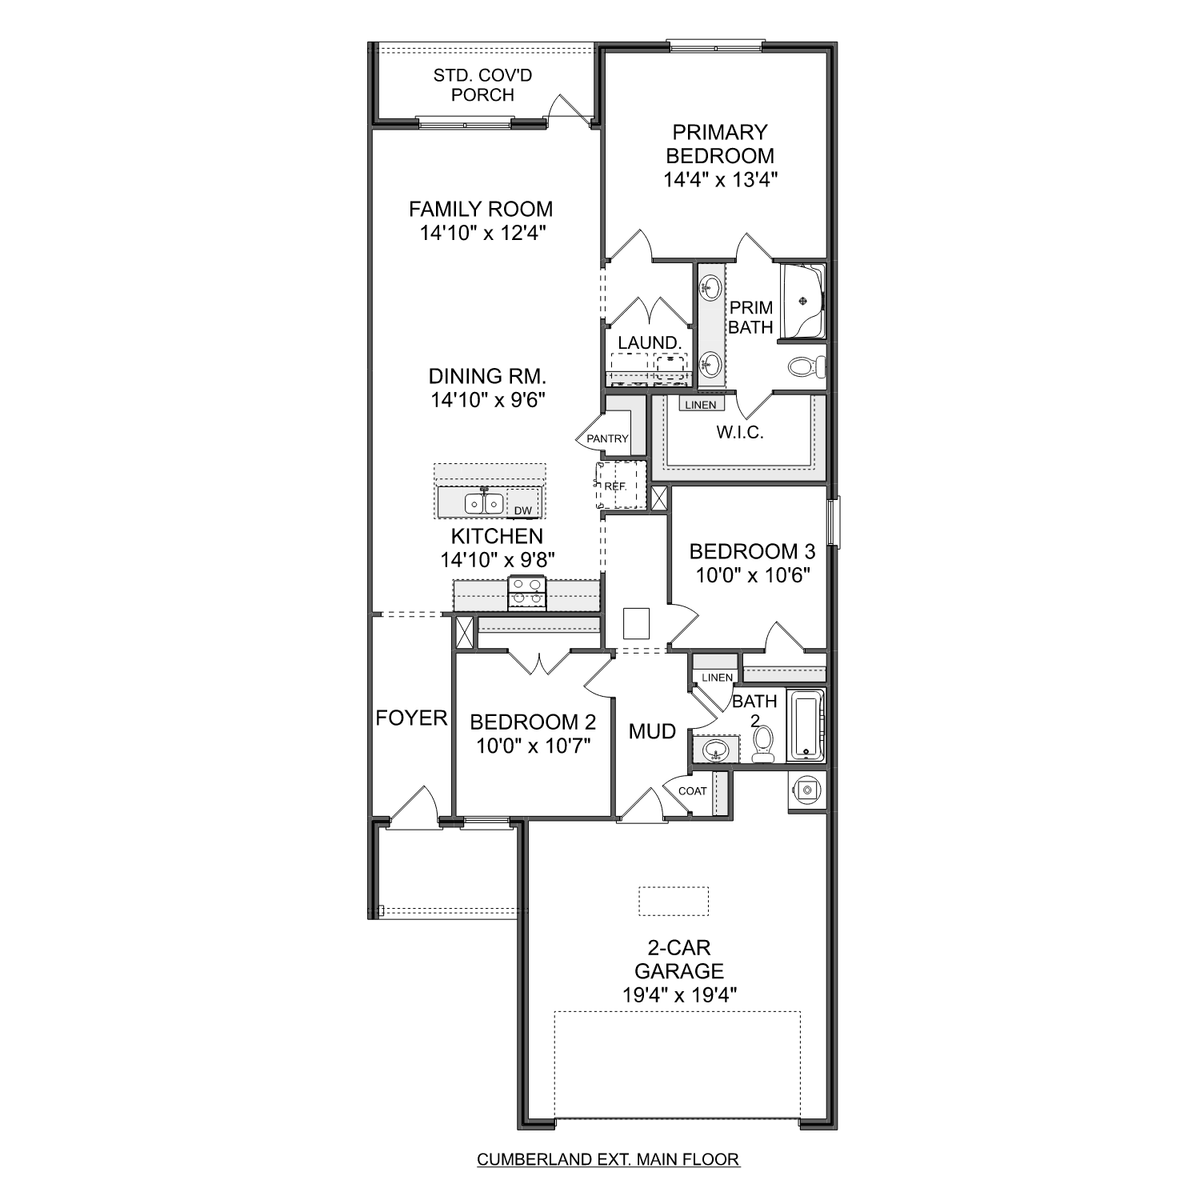 1 - The Cumberland C floor plan layout for 3137 Lea Lane SE in Davidson Homes' Hollon Meadow community.